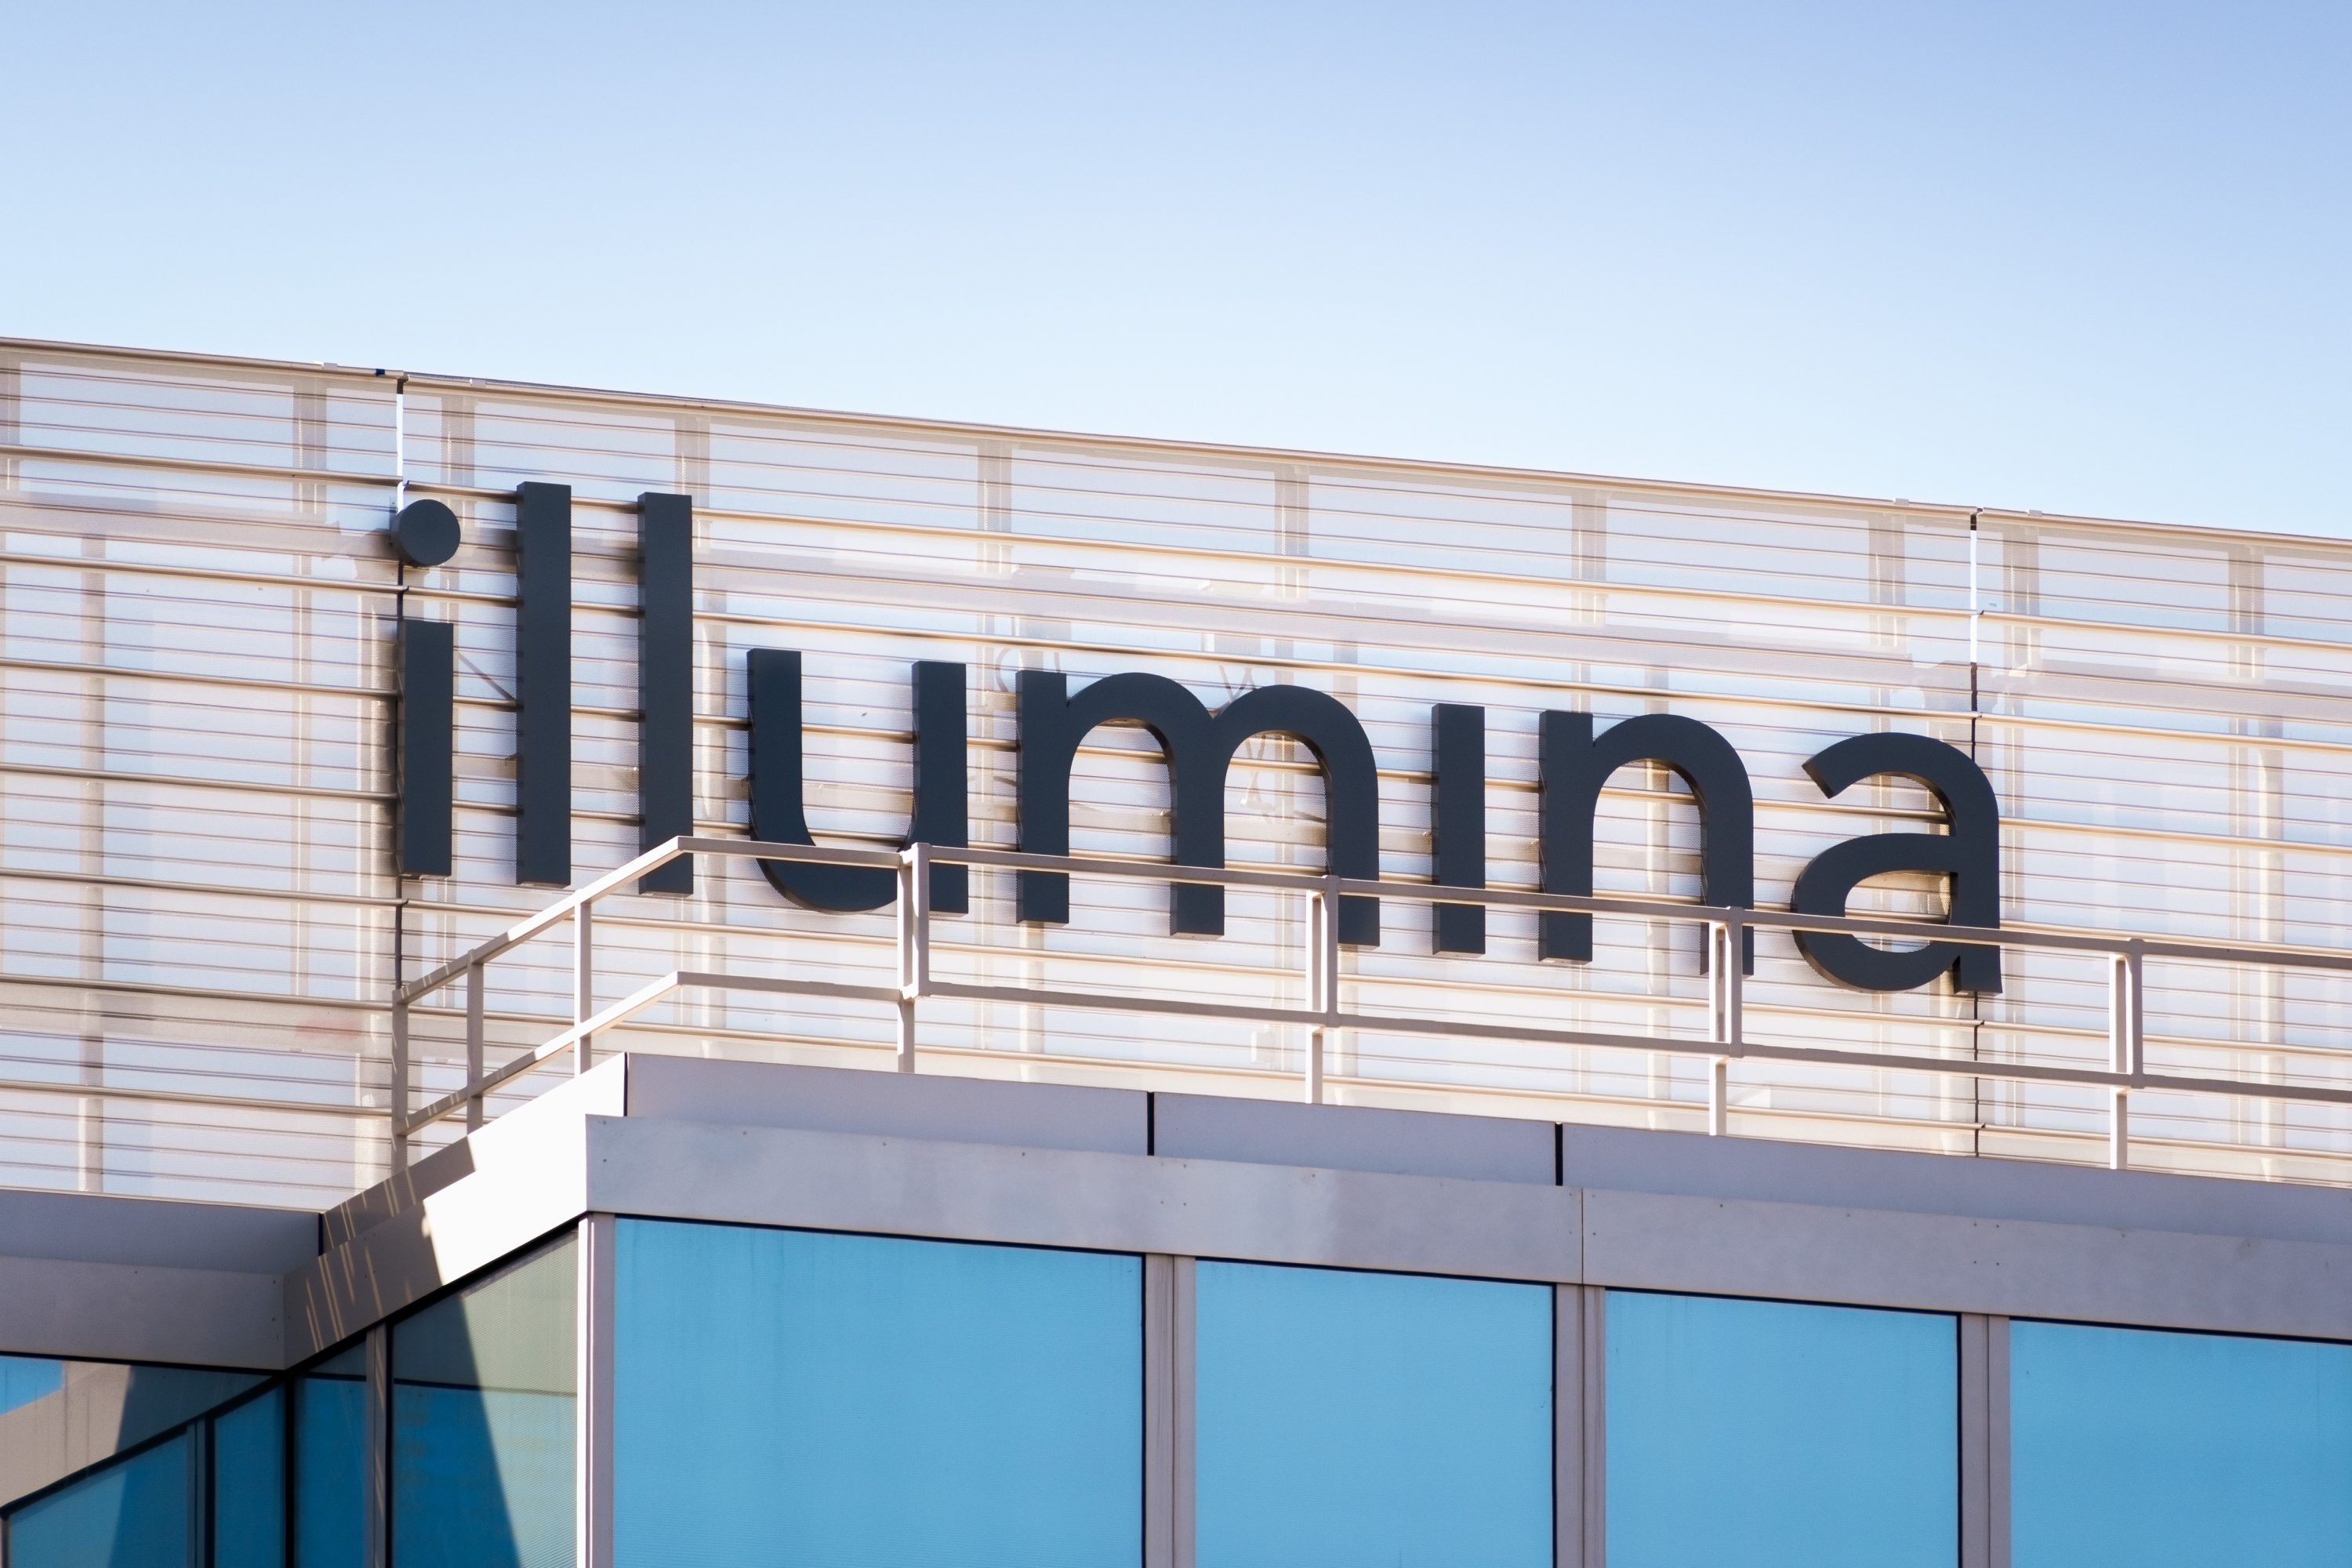 Illumina Buys Grail, Whose Patent Portfolio Is Valuable but Its Validity Remains Unclear